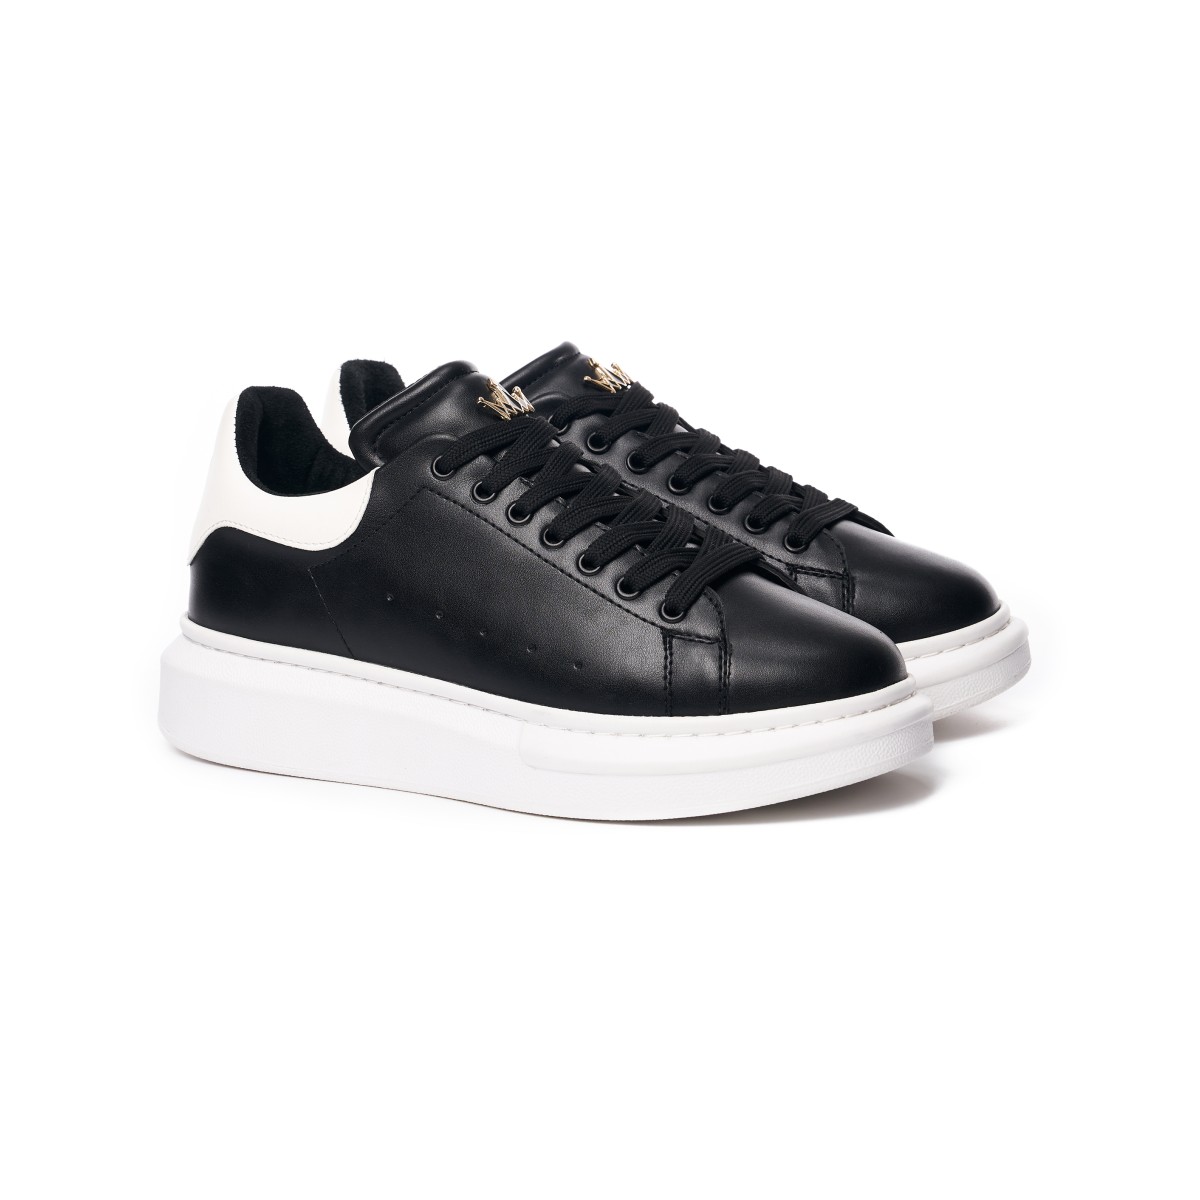 Men’s Crowned Chunky Sneakers Shoes in Black and White | Martin Valen